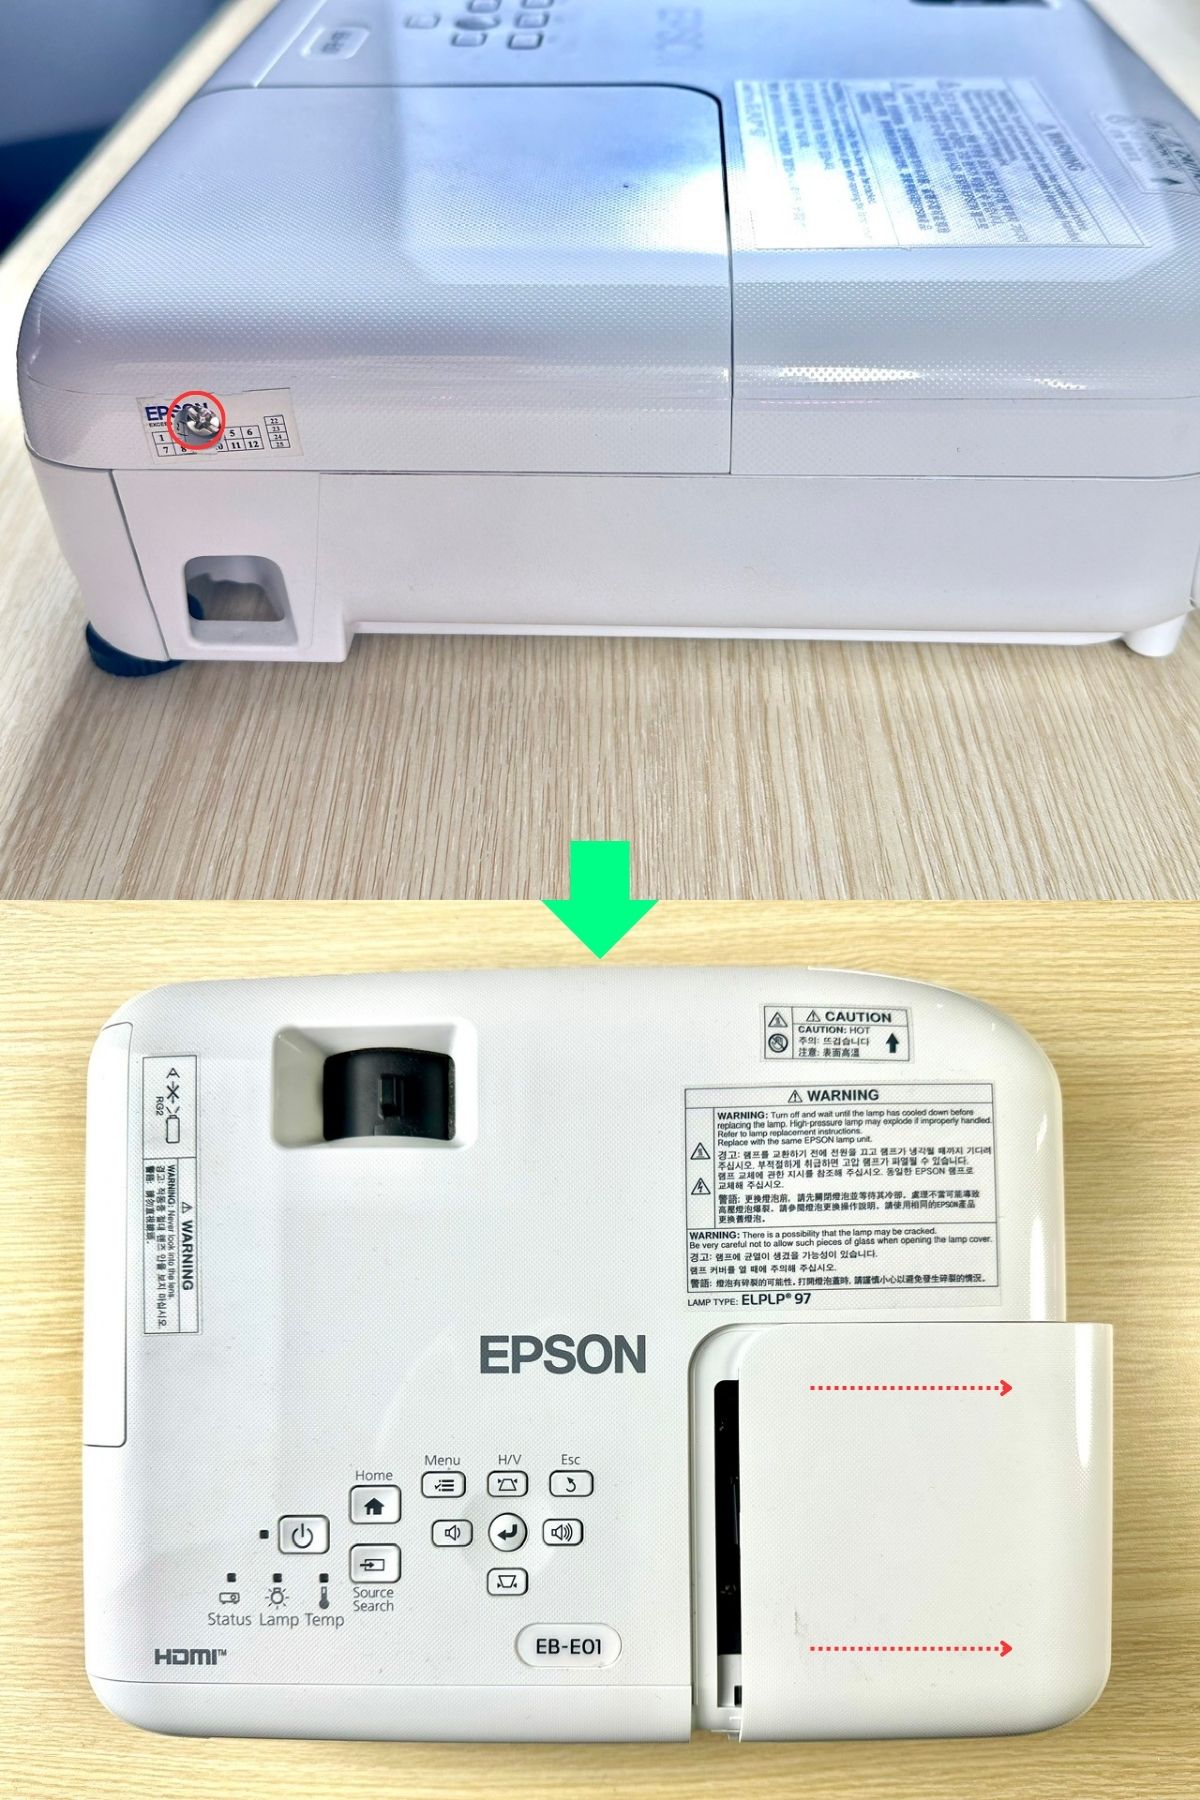 remove the epson lamp cover